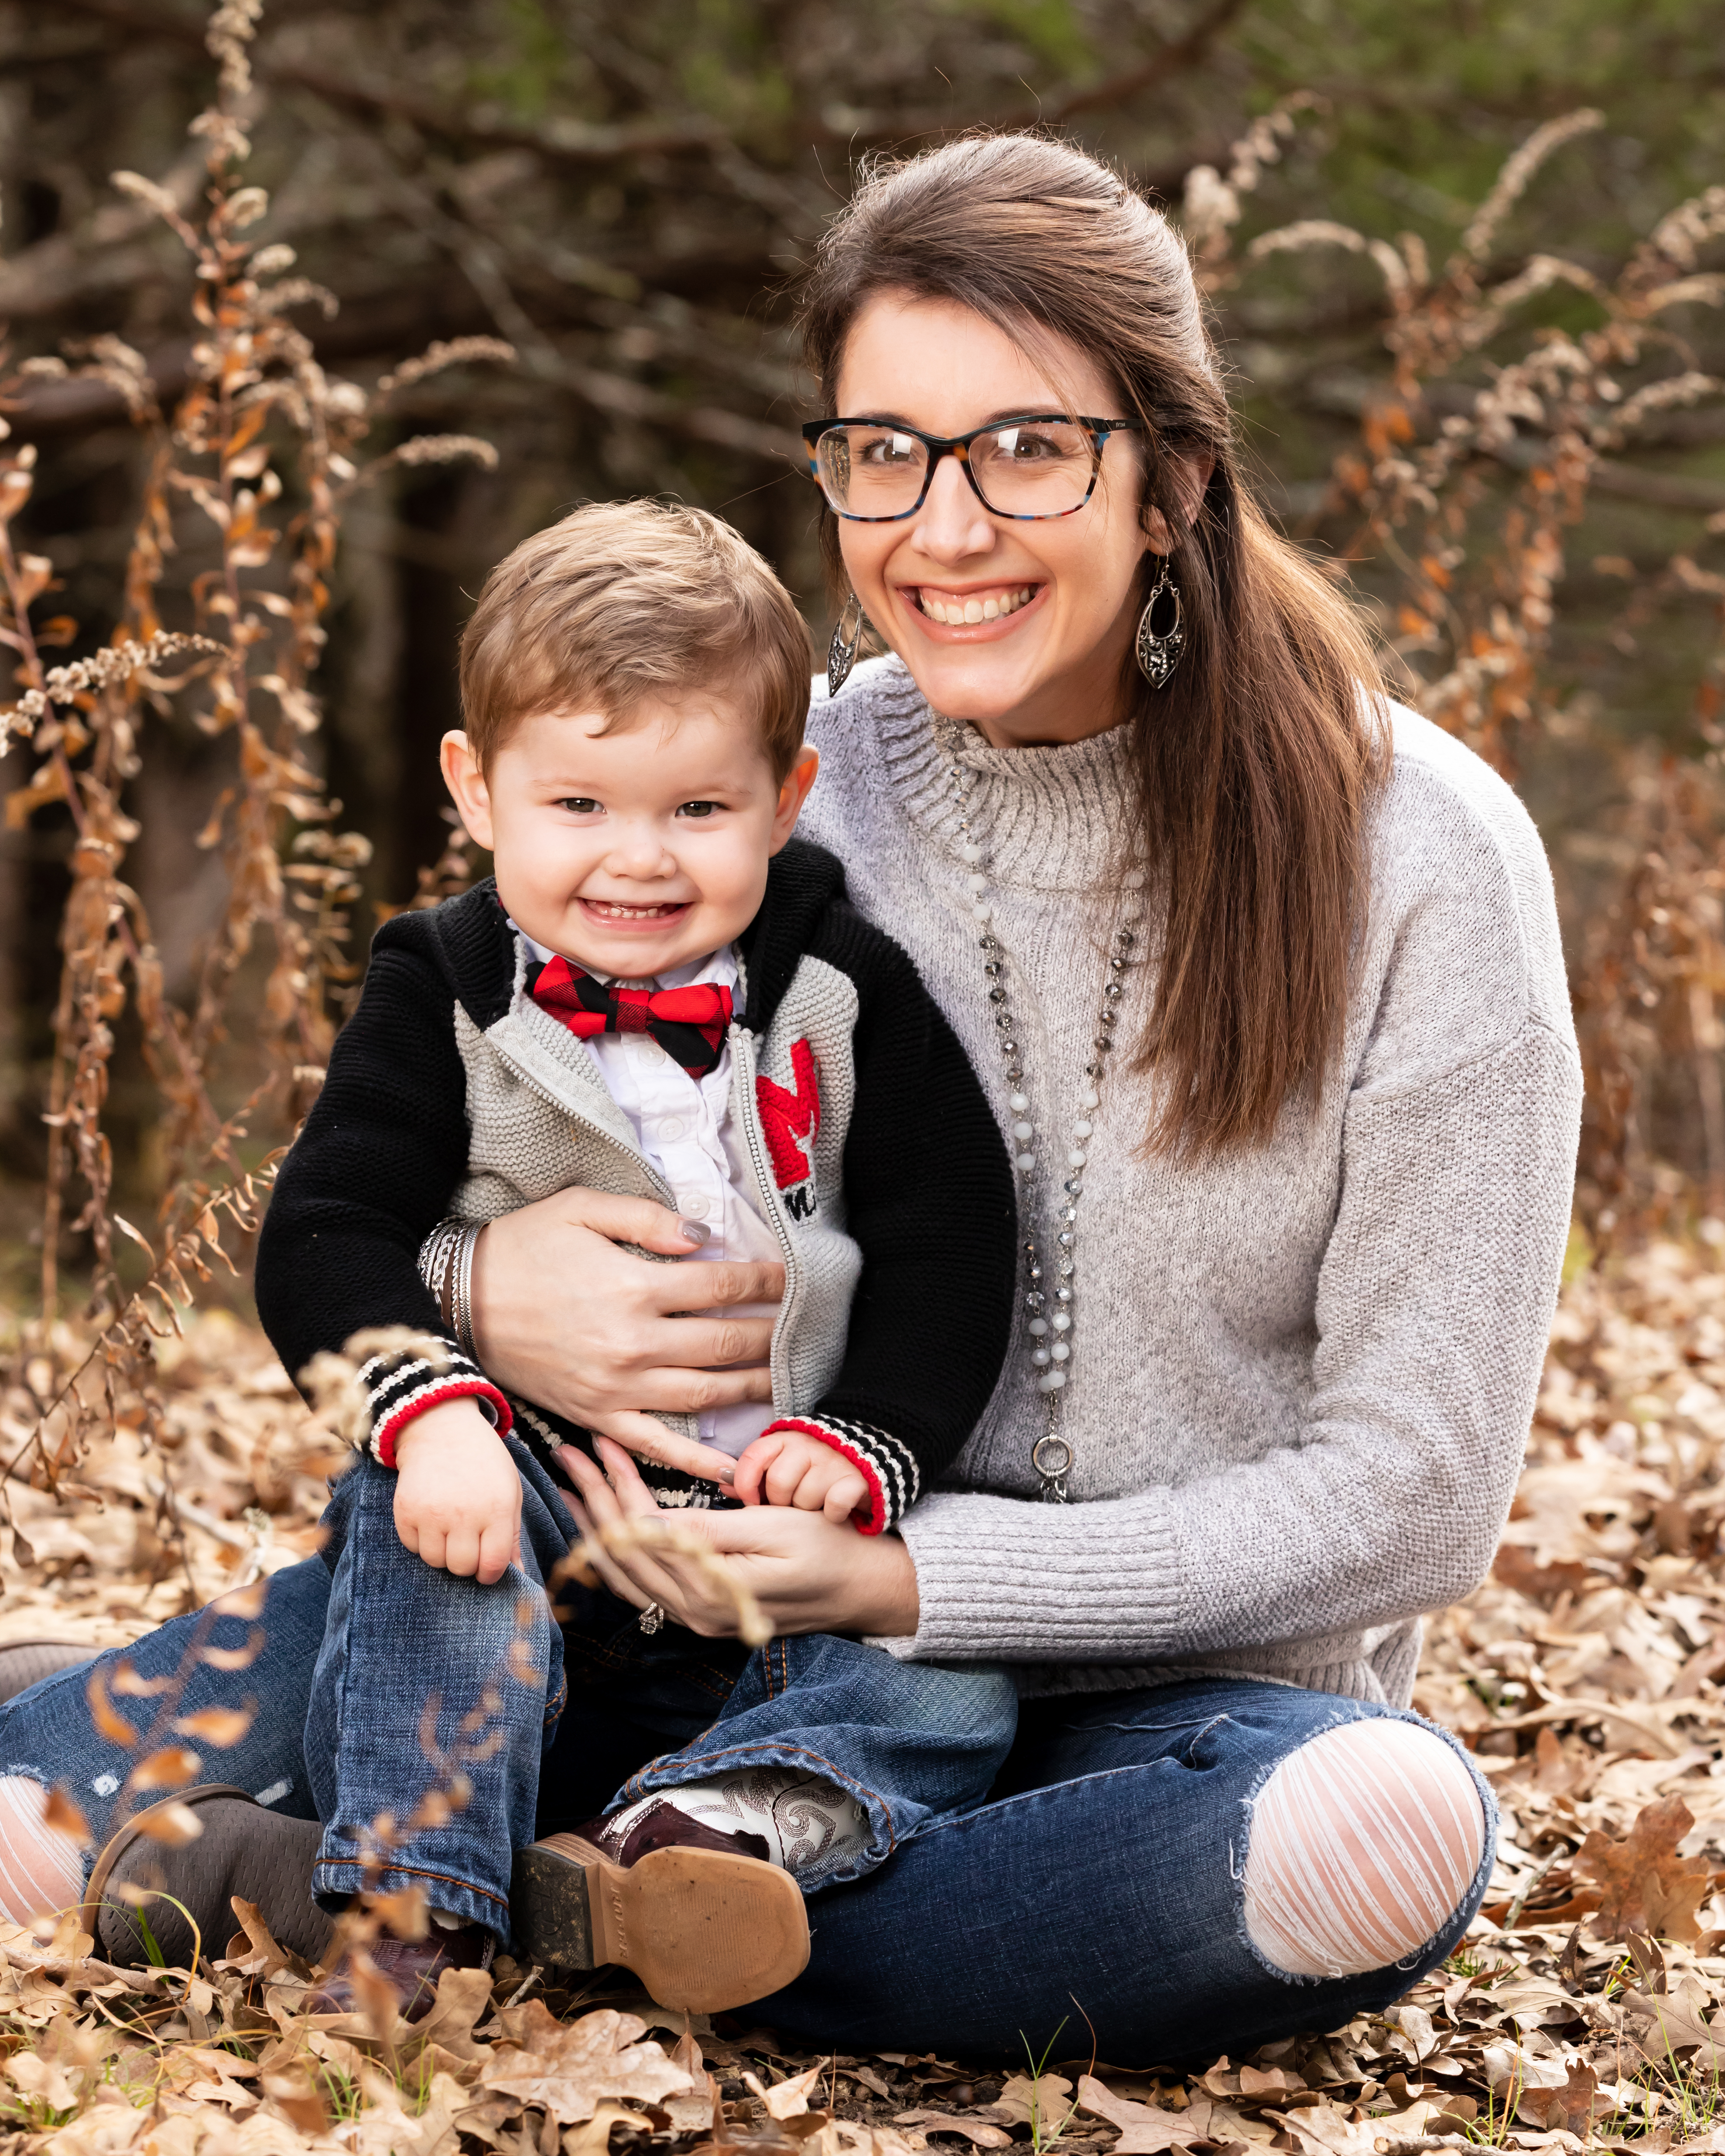 Logan Maxwell with Child outside during fall